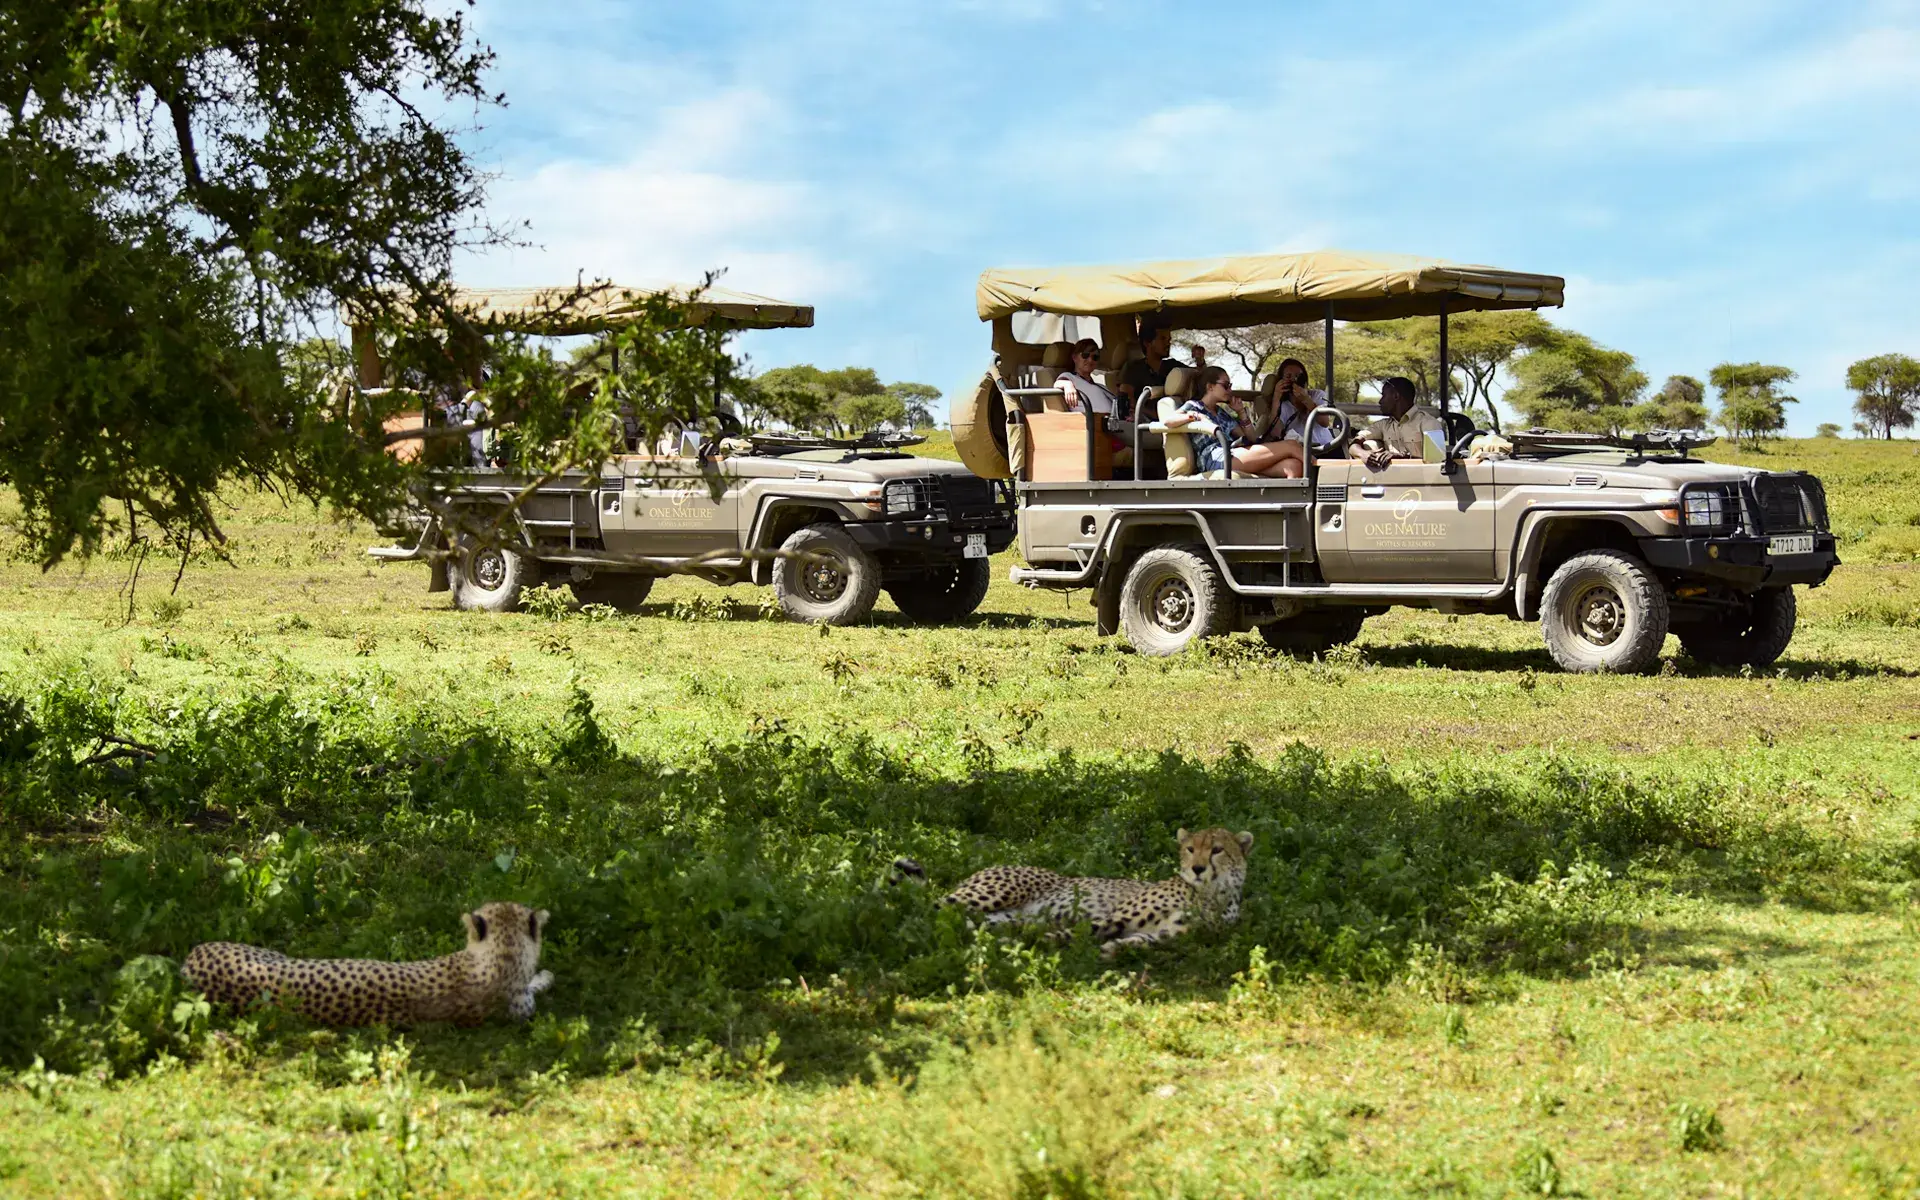 On a game drive, guests enjoy a close encounter with African Cheetahs relaxing under a tree